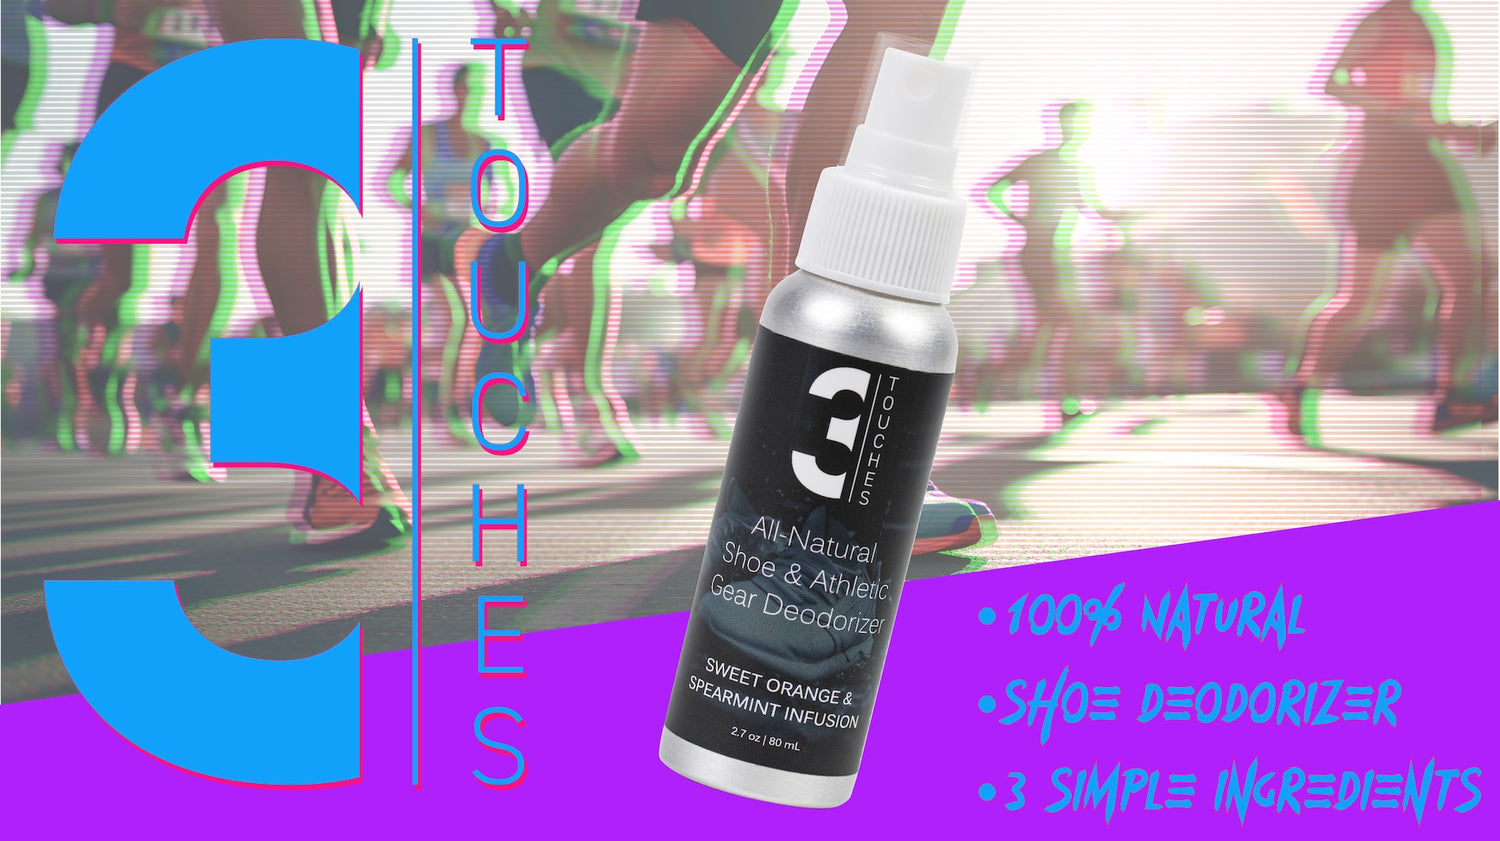 3 Touches All Natural Shoe and Athletic Gear & Equipment Deodorizer for Athletes - Essential Oils - Made in the USA